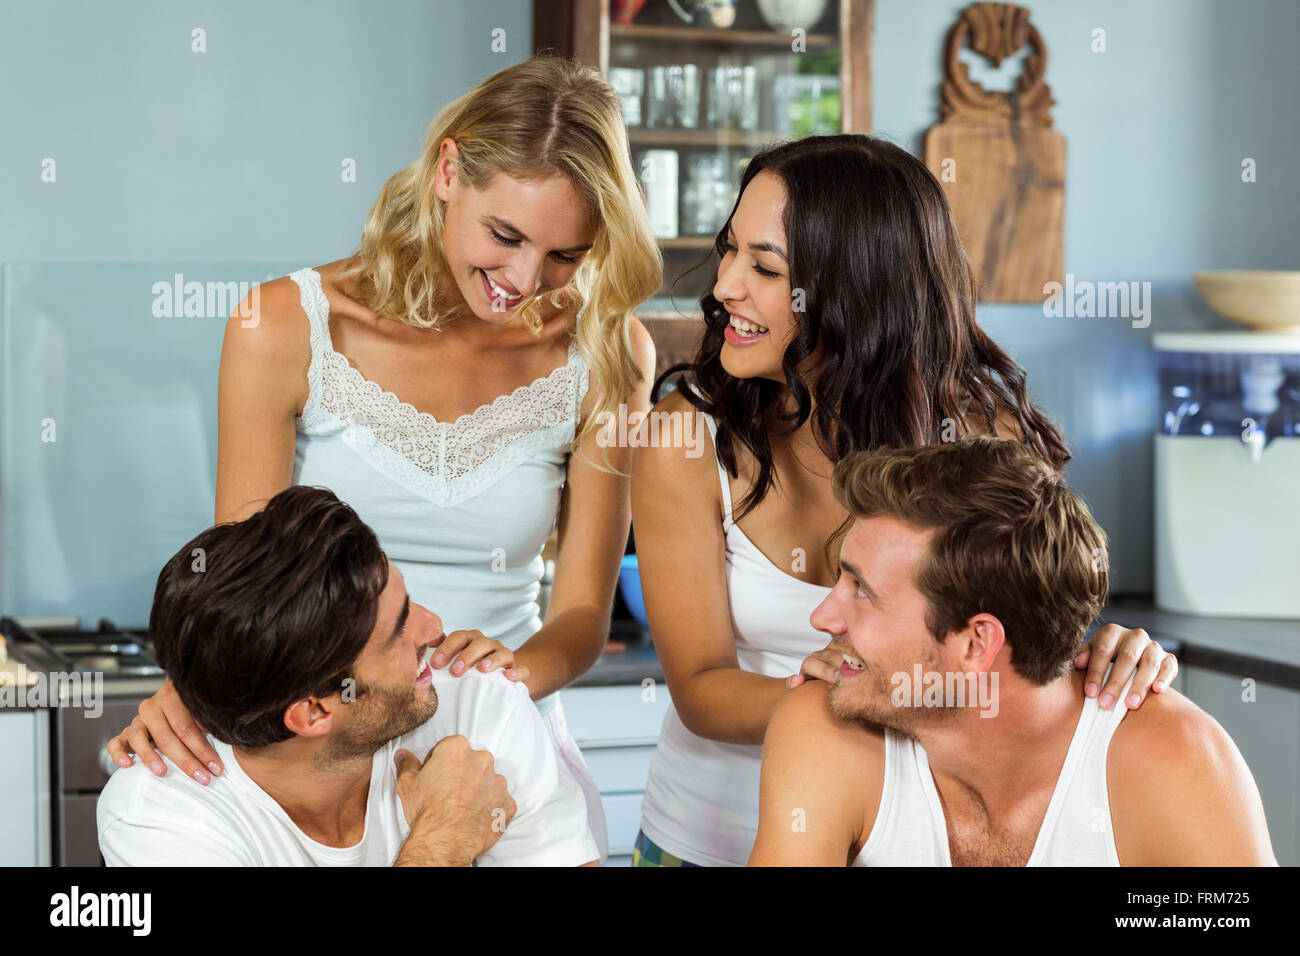 Young couples spending leisure time at home Stock Photo